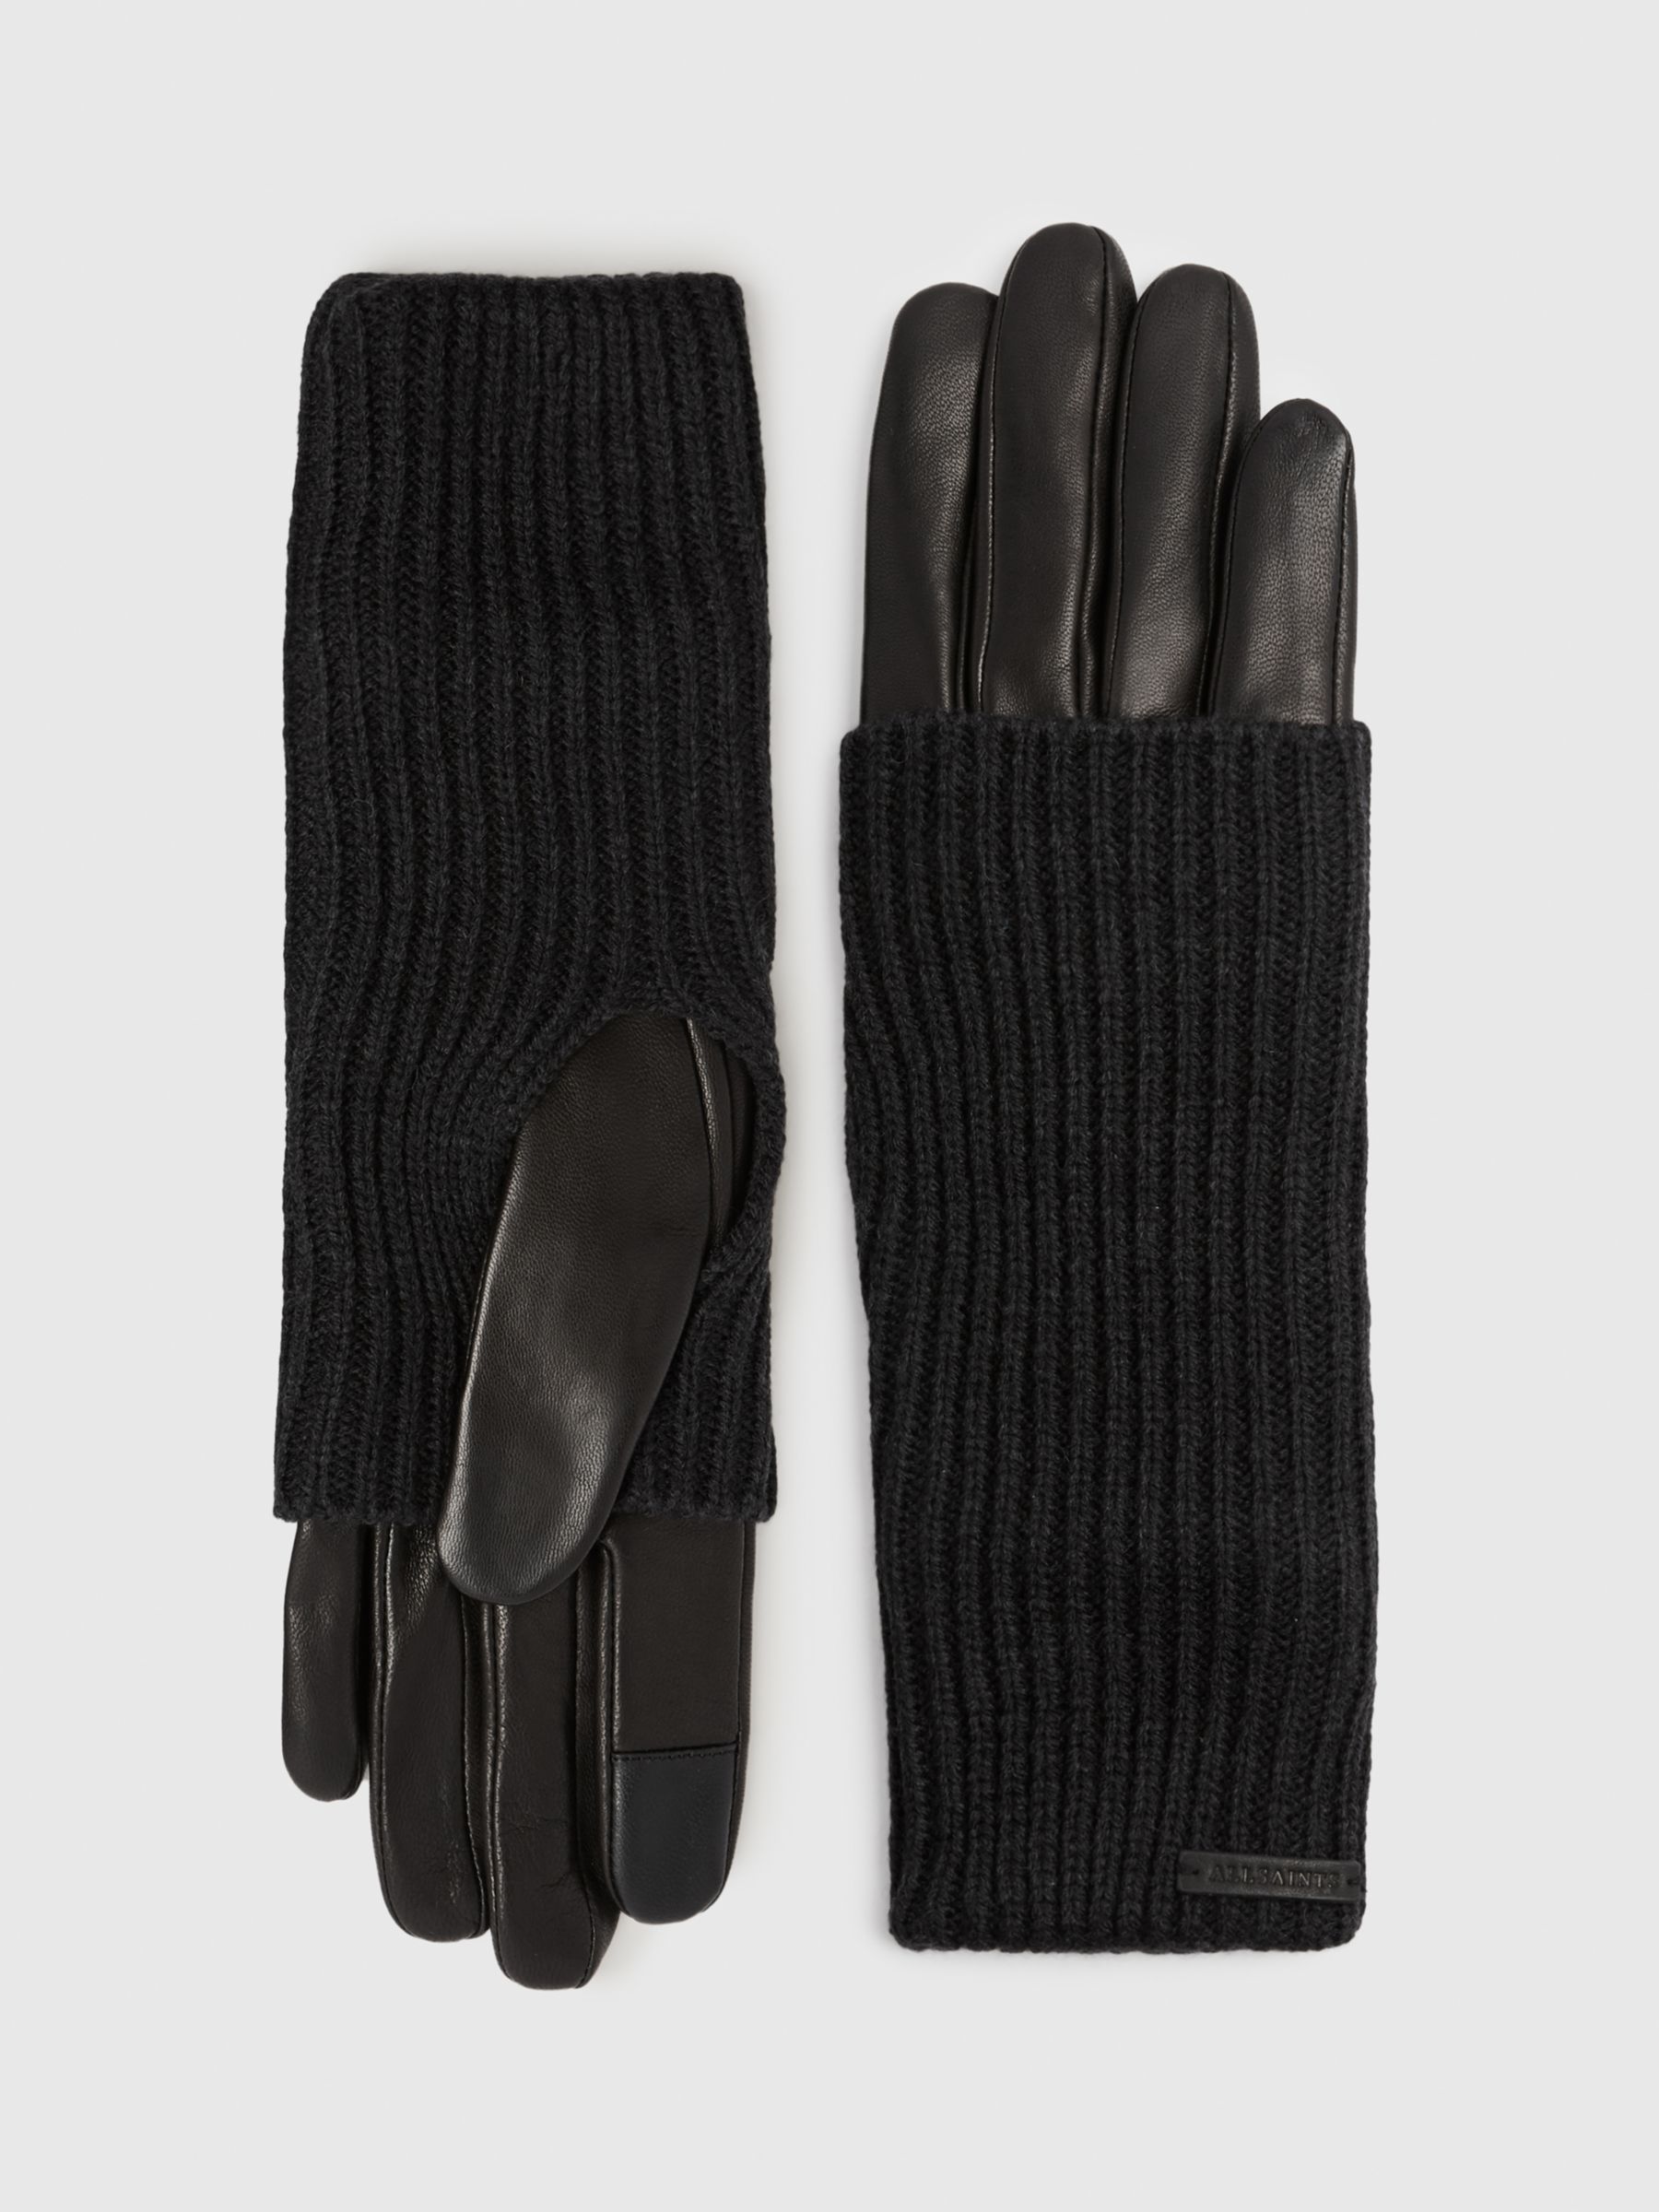 AllSaints Zoya Knitted Cuff Leather Gloves